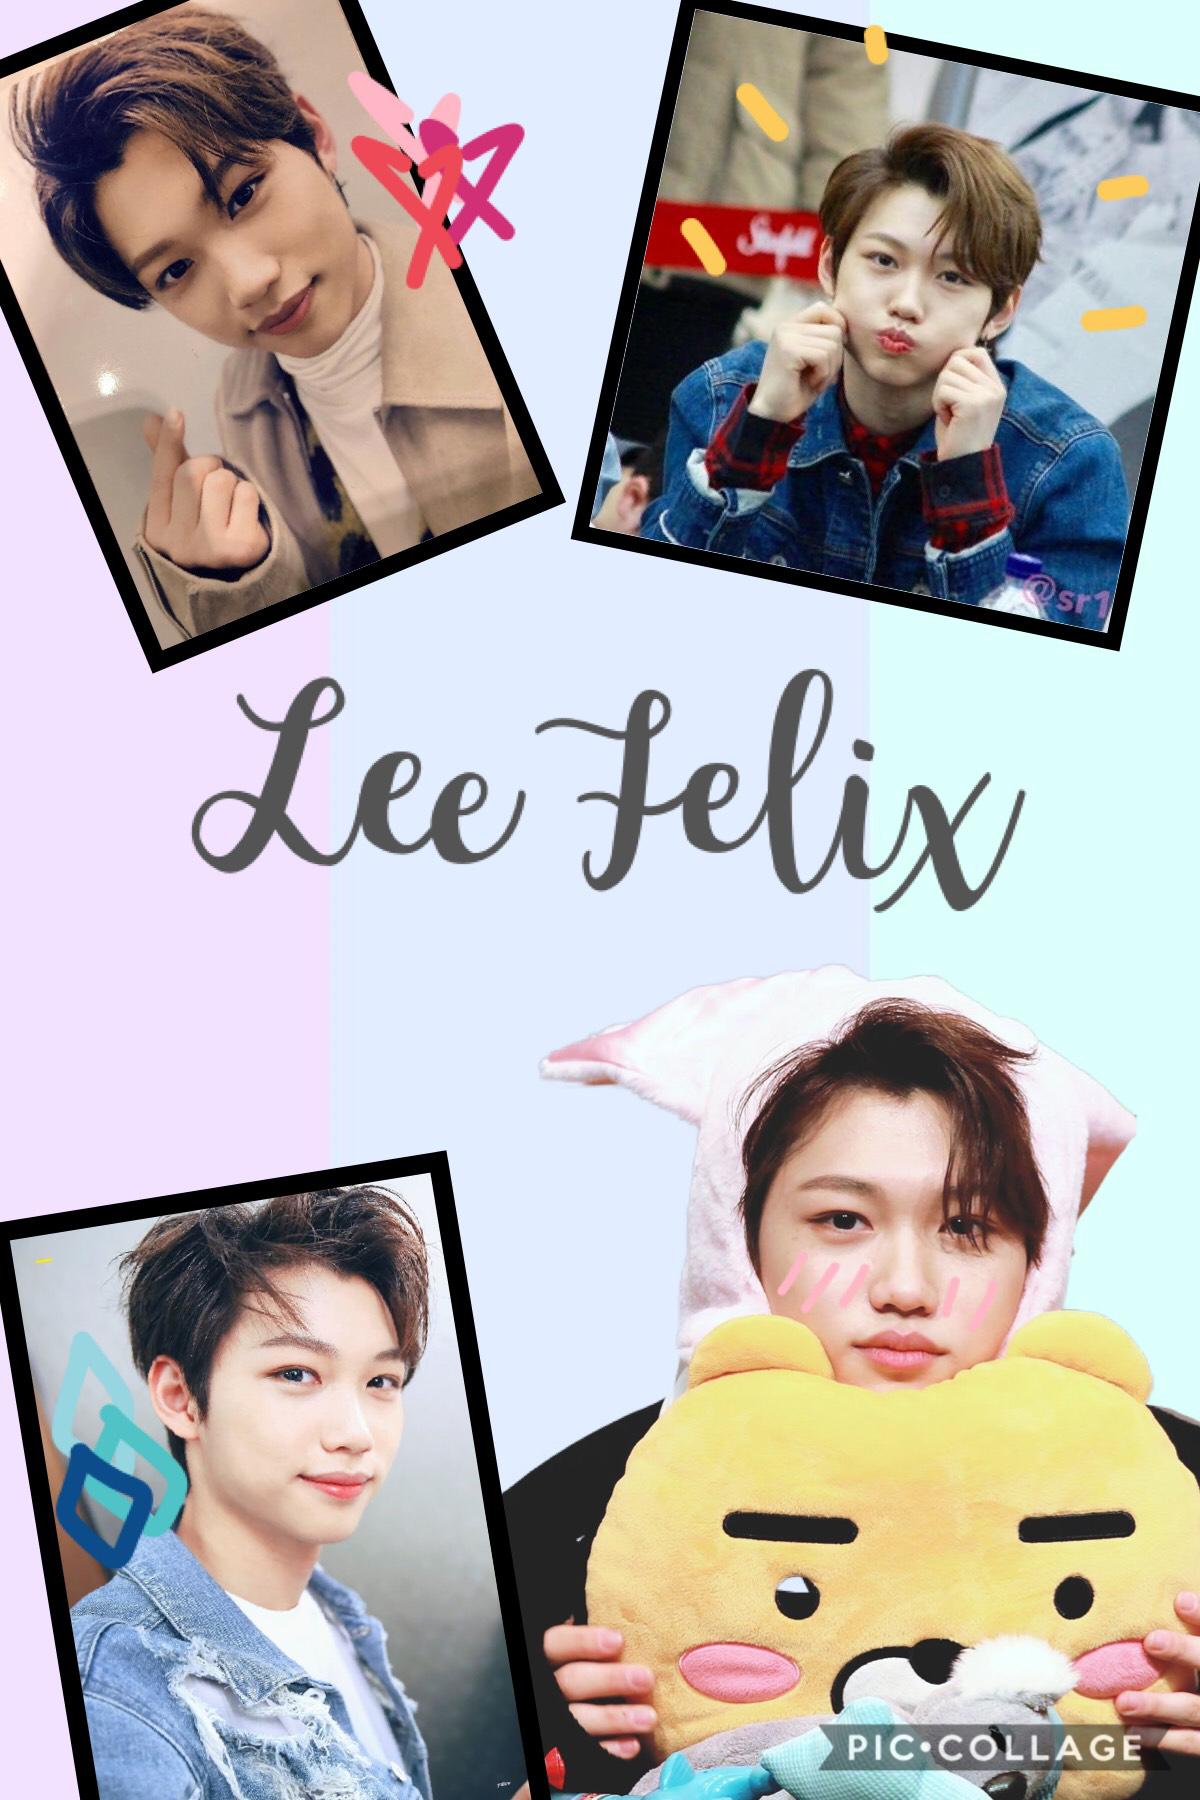 I don’t really know start kids that much but I am tryin to know them better here is my bias Felix 